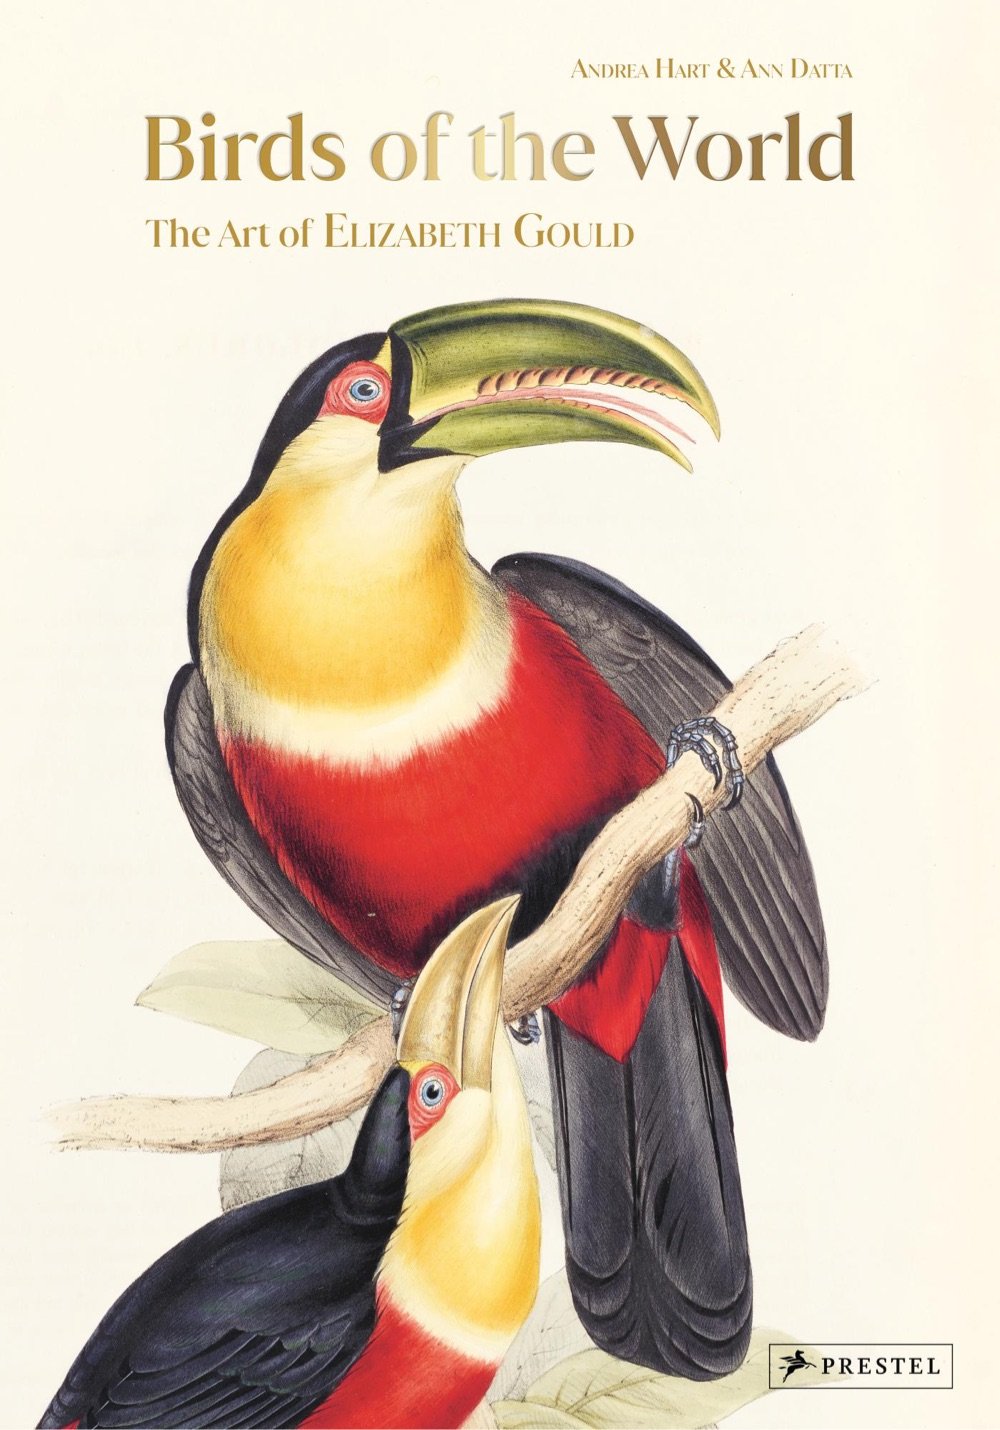 cover of a book called Birds of the World: The Art of Elizabeth Gould with an illustration of a pair of toucans